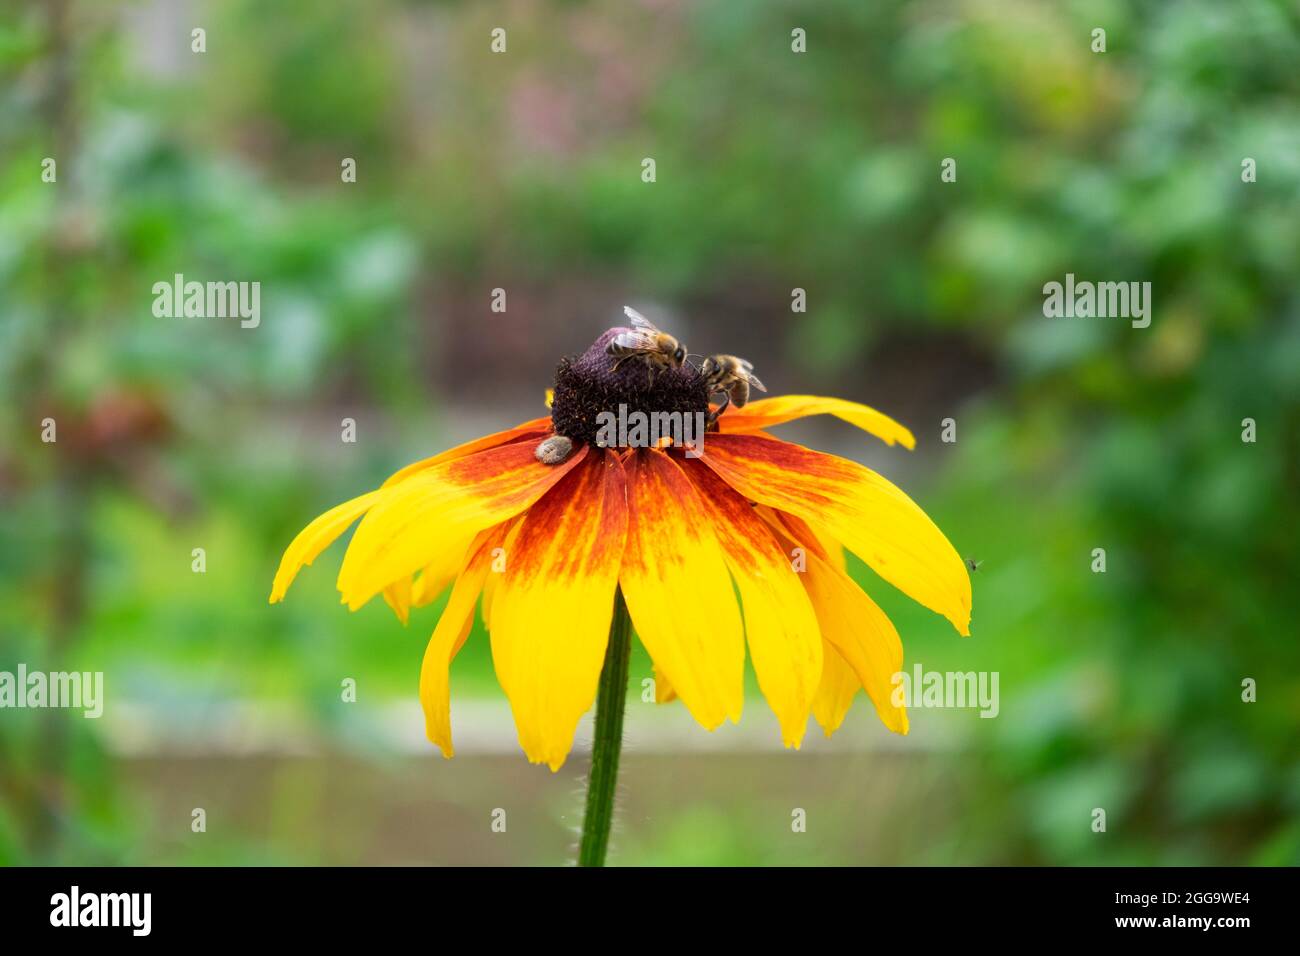 Honey bees and insect feeding on yellow and red rudbeckia flower in bloom in summer garden rural Carmarthenshire Wales UK Great Britain   KATHY DEWITT Stock Photo